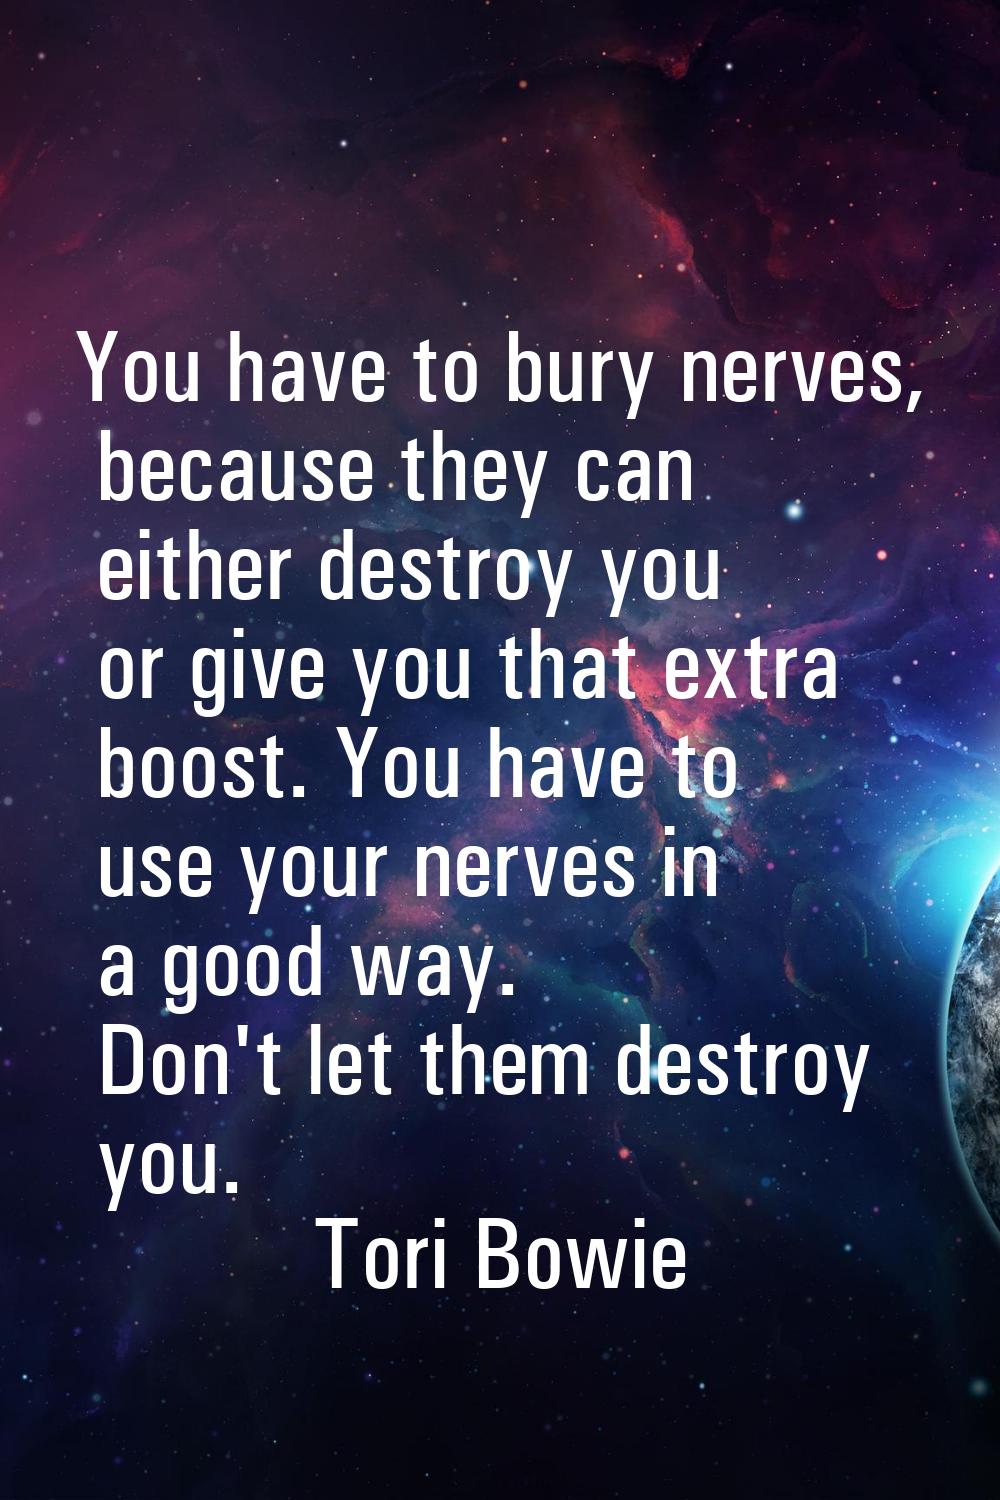 You have to bury nerves, because they can either destroy you or give you that extra boost. You have